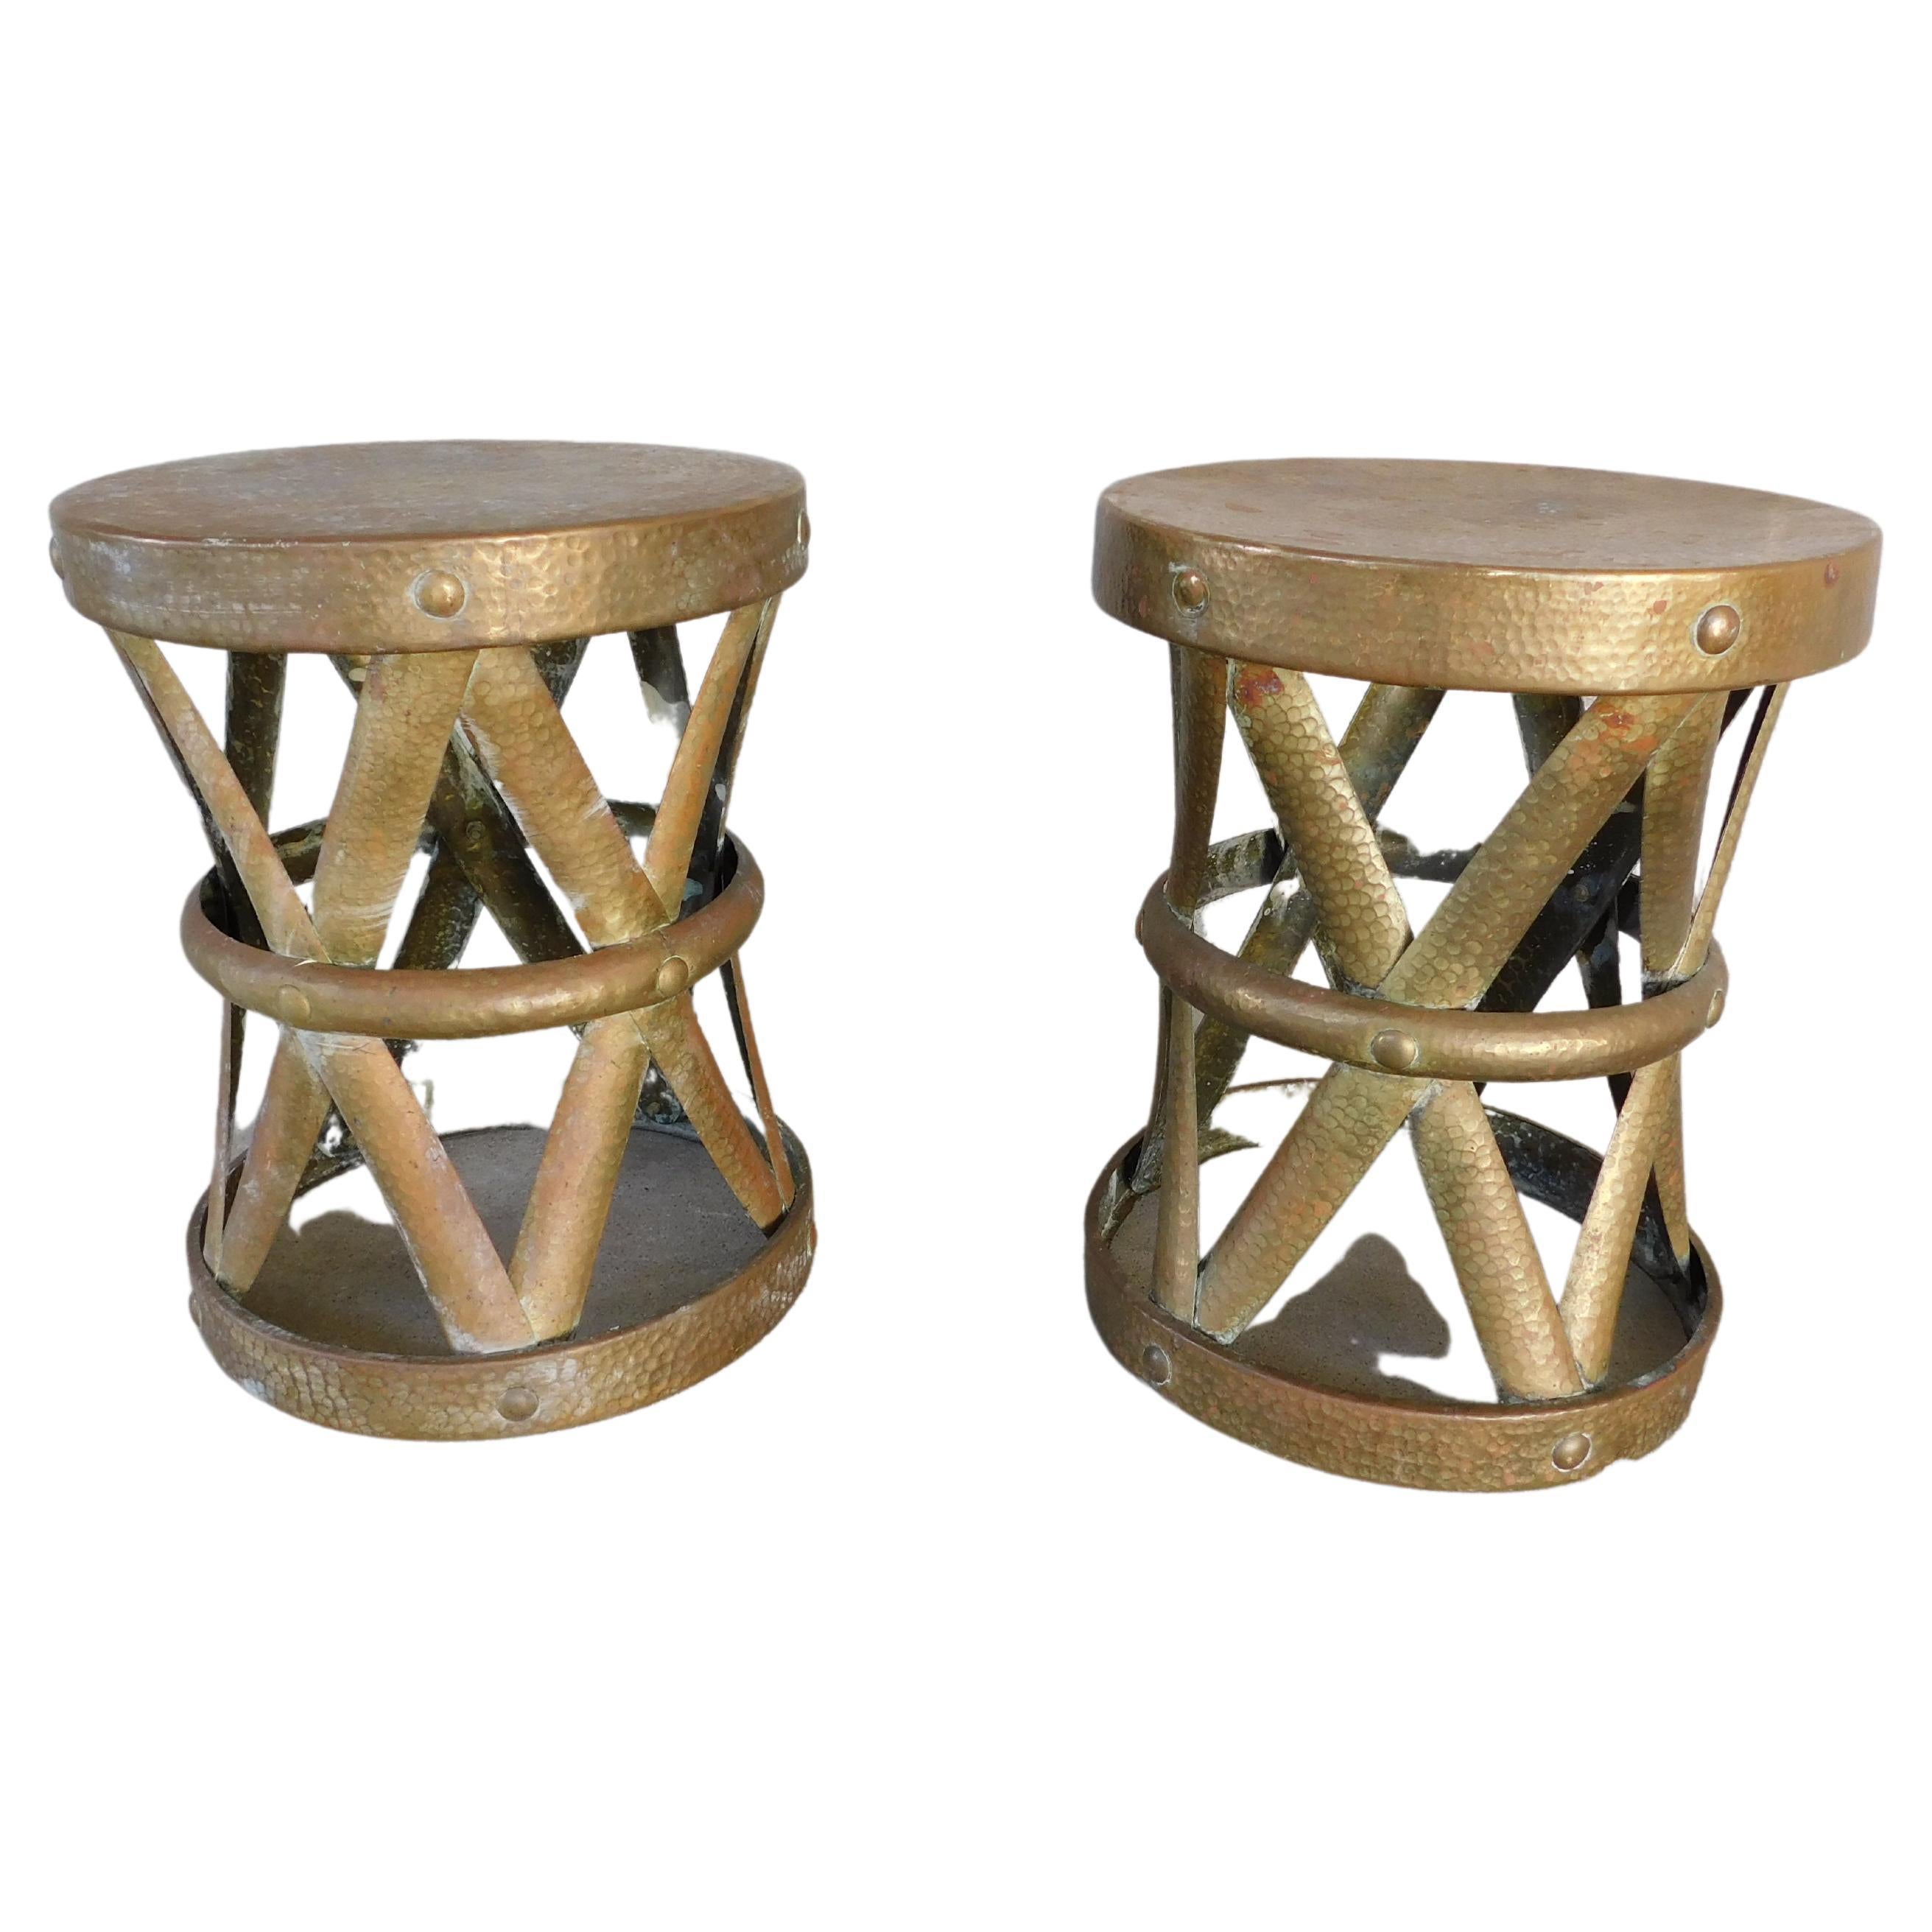 Mid-Century Hammered Brass Accent Tables or Stools, a Pair